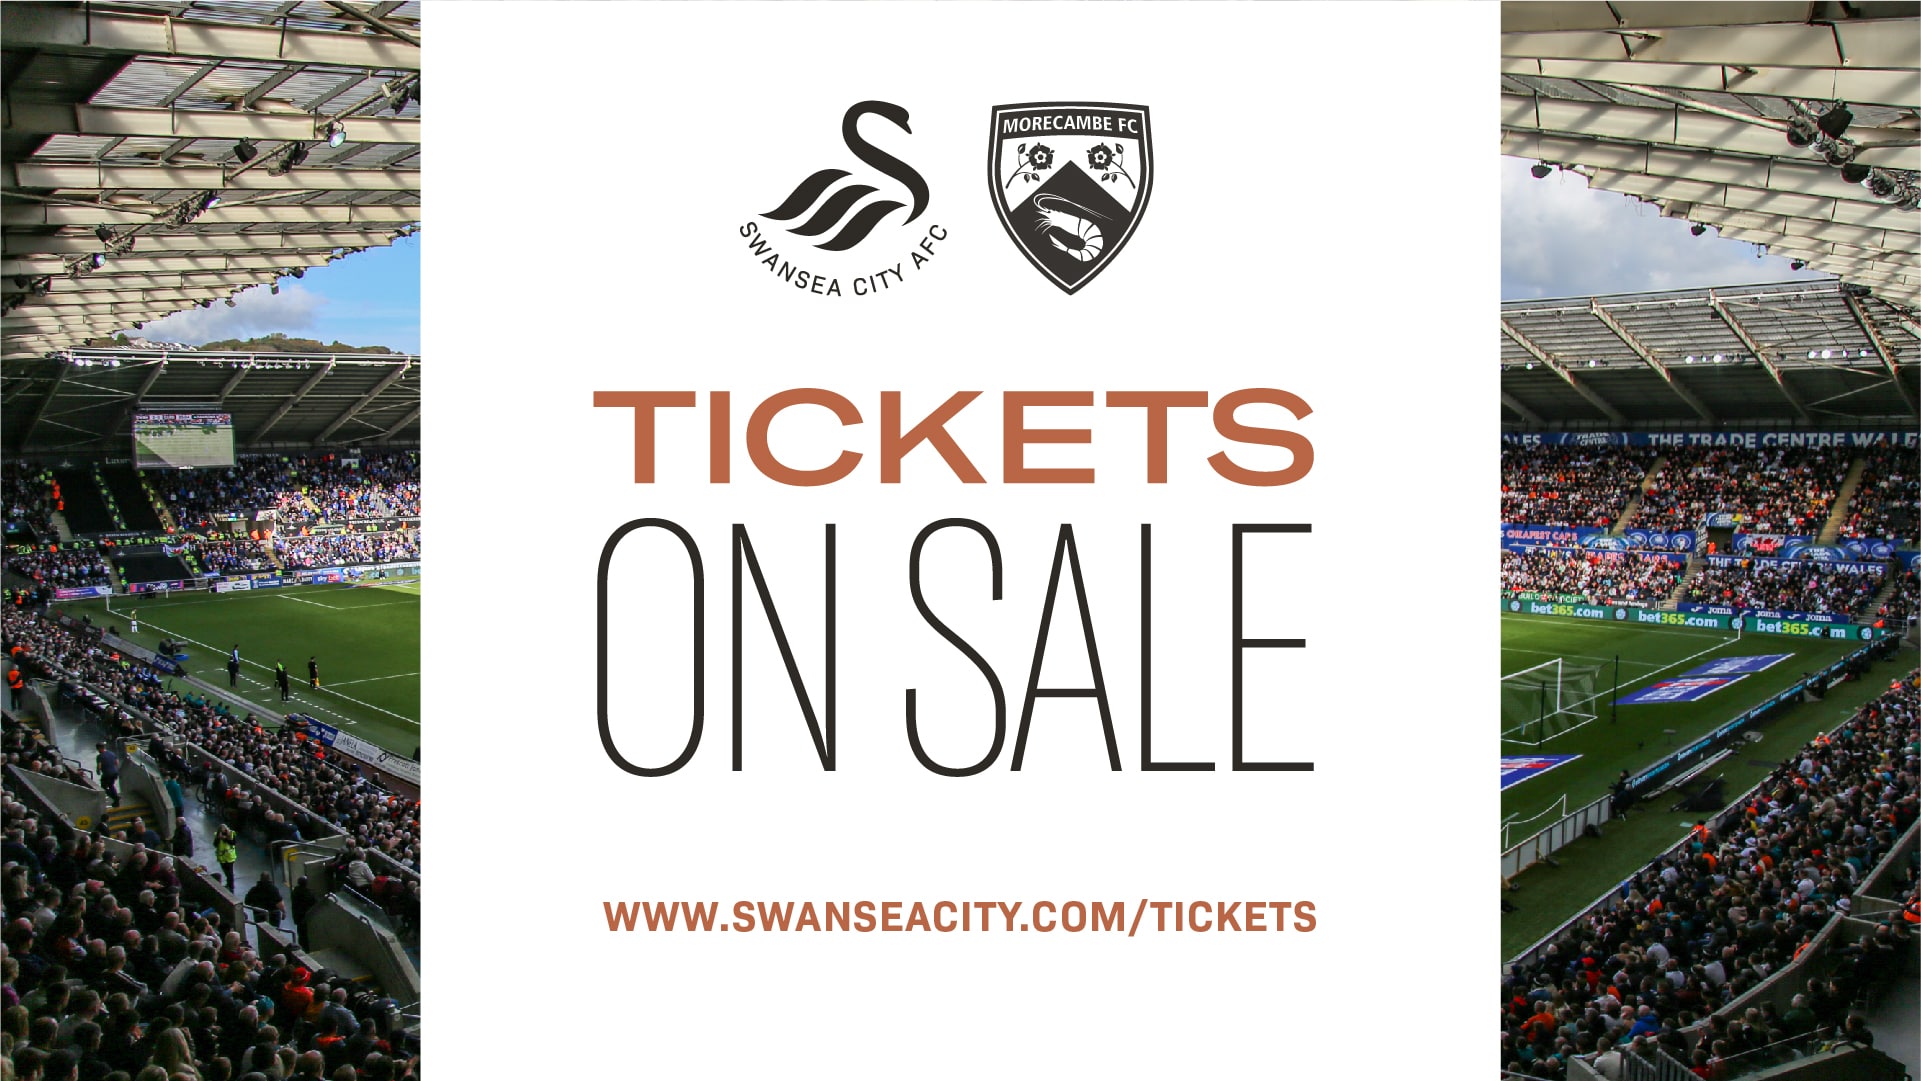 Tickets on sale - Morecambe FA Cup